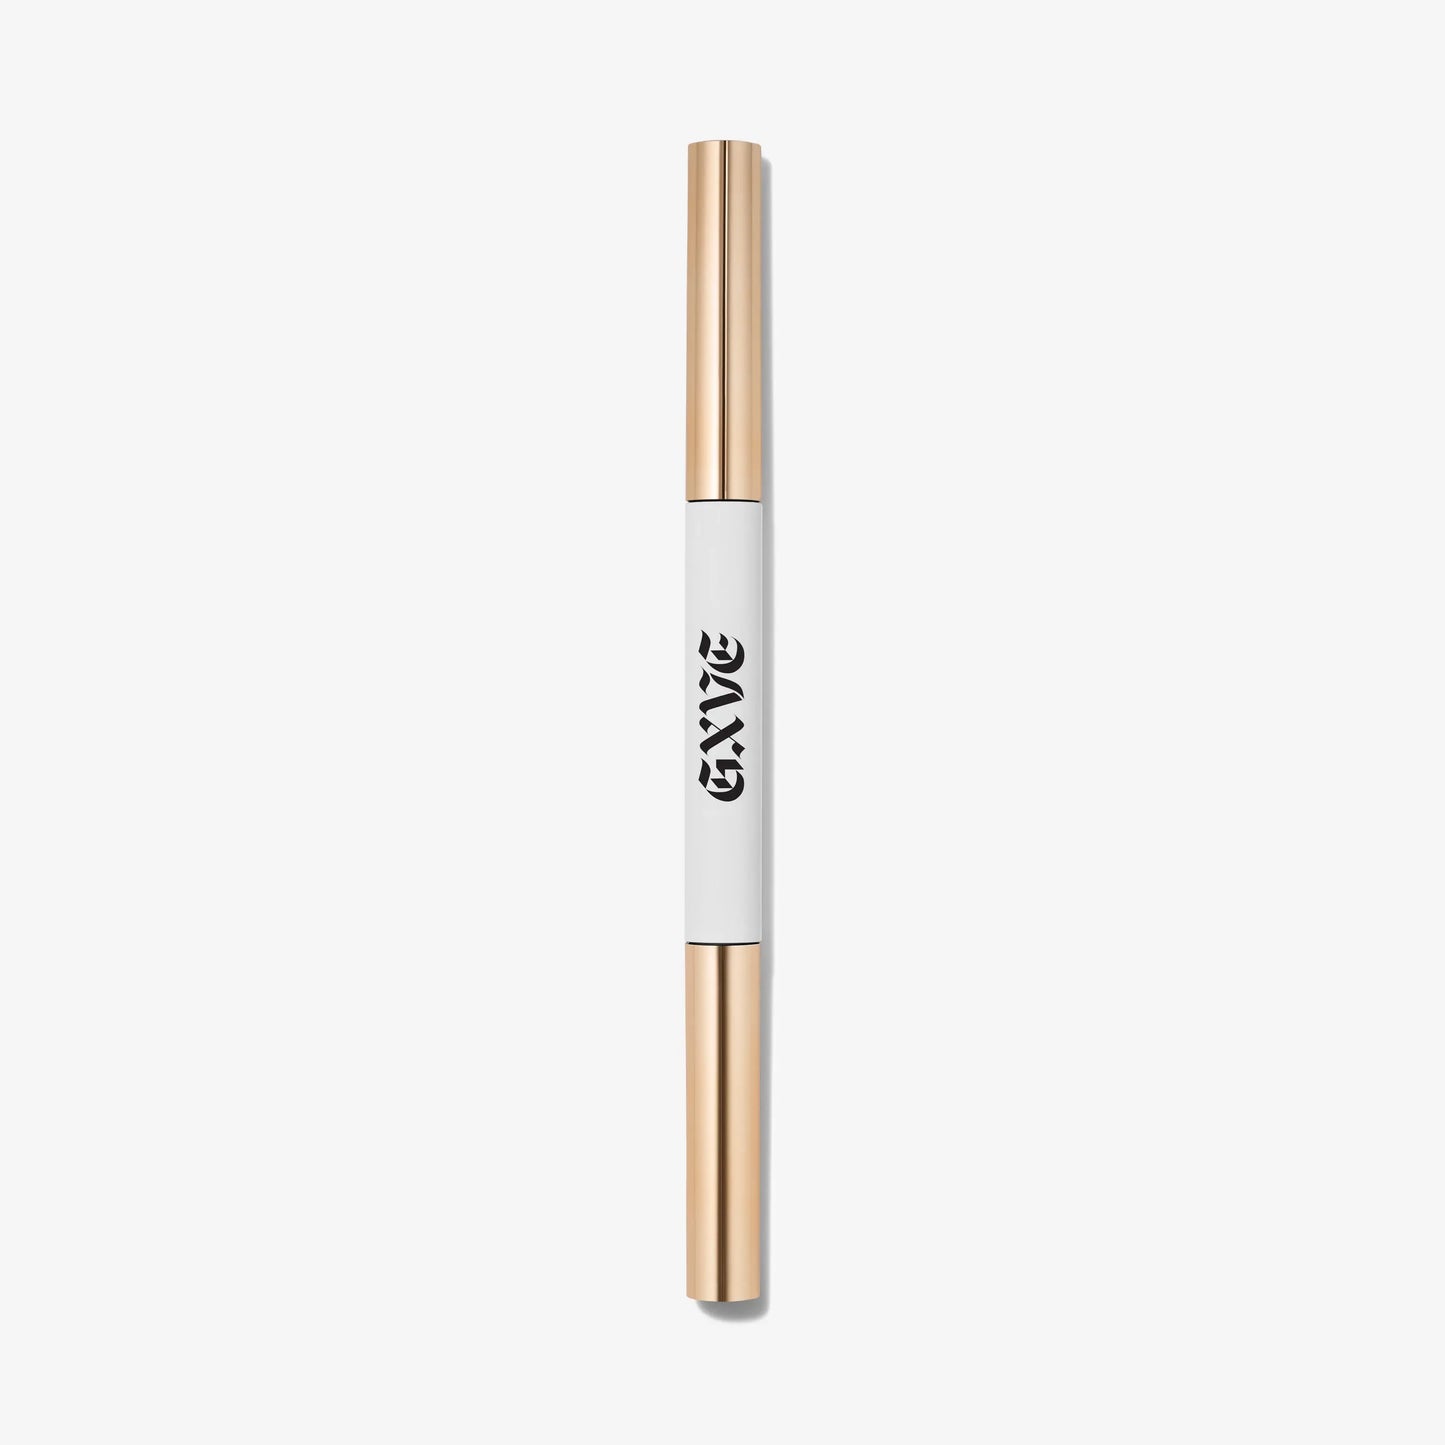 GXVE 6 - Ultra-Fine Eyebrow Pencil For Natural Brows